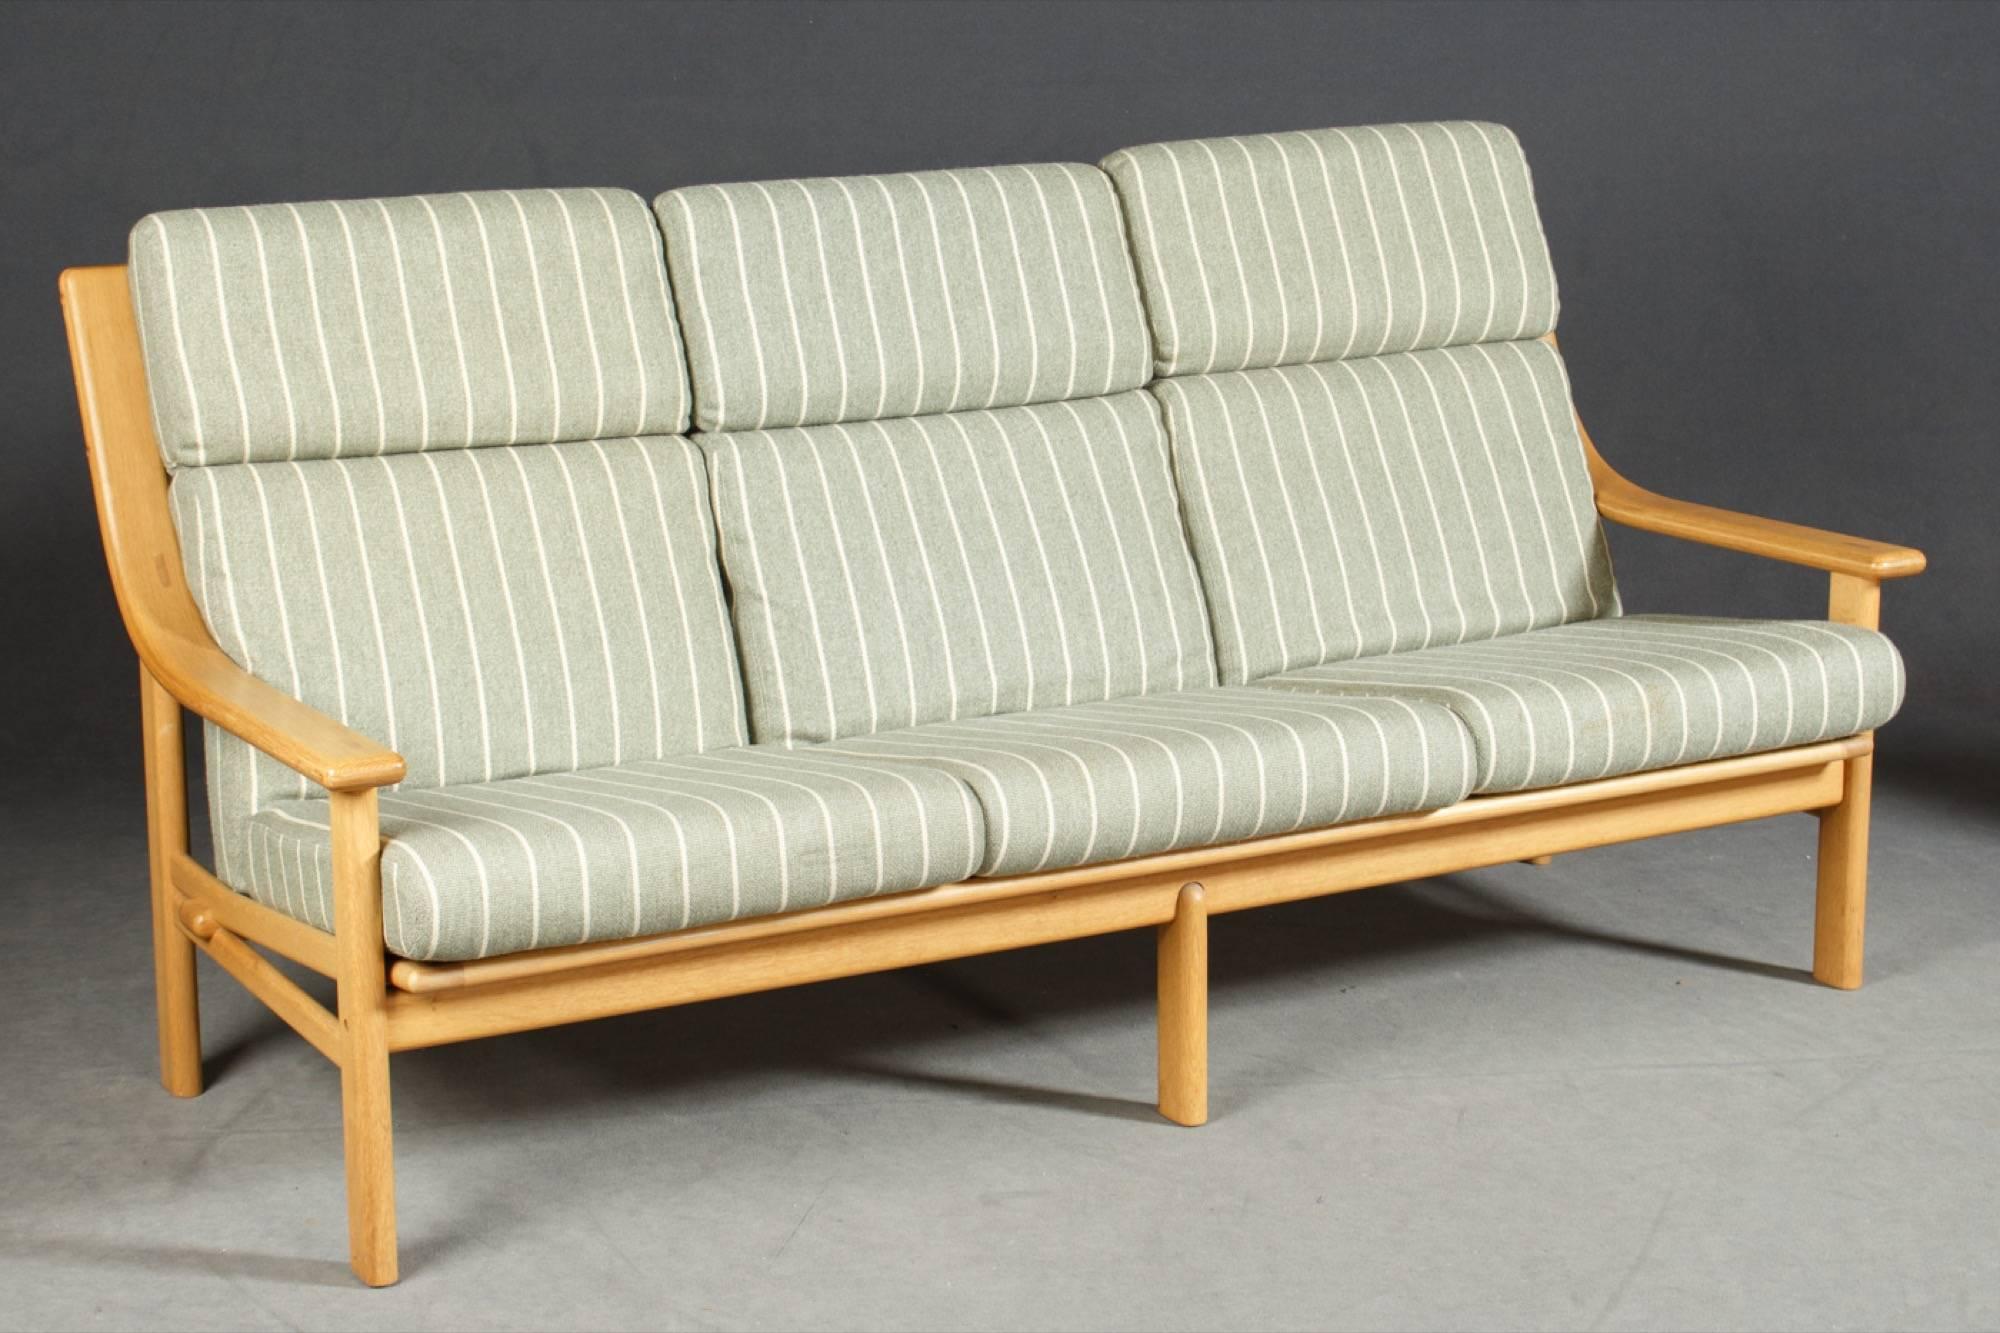 Designed by Johannes Andersen for CFC Silkeborg, this sofa is constructed of a beech frame and three loose cushions.